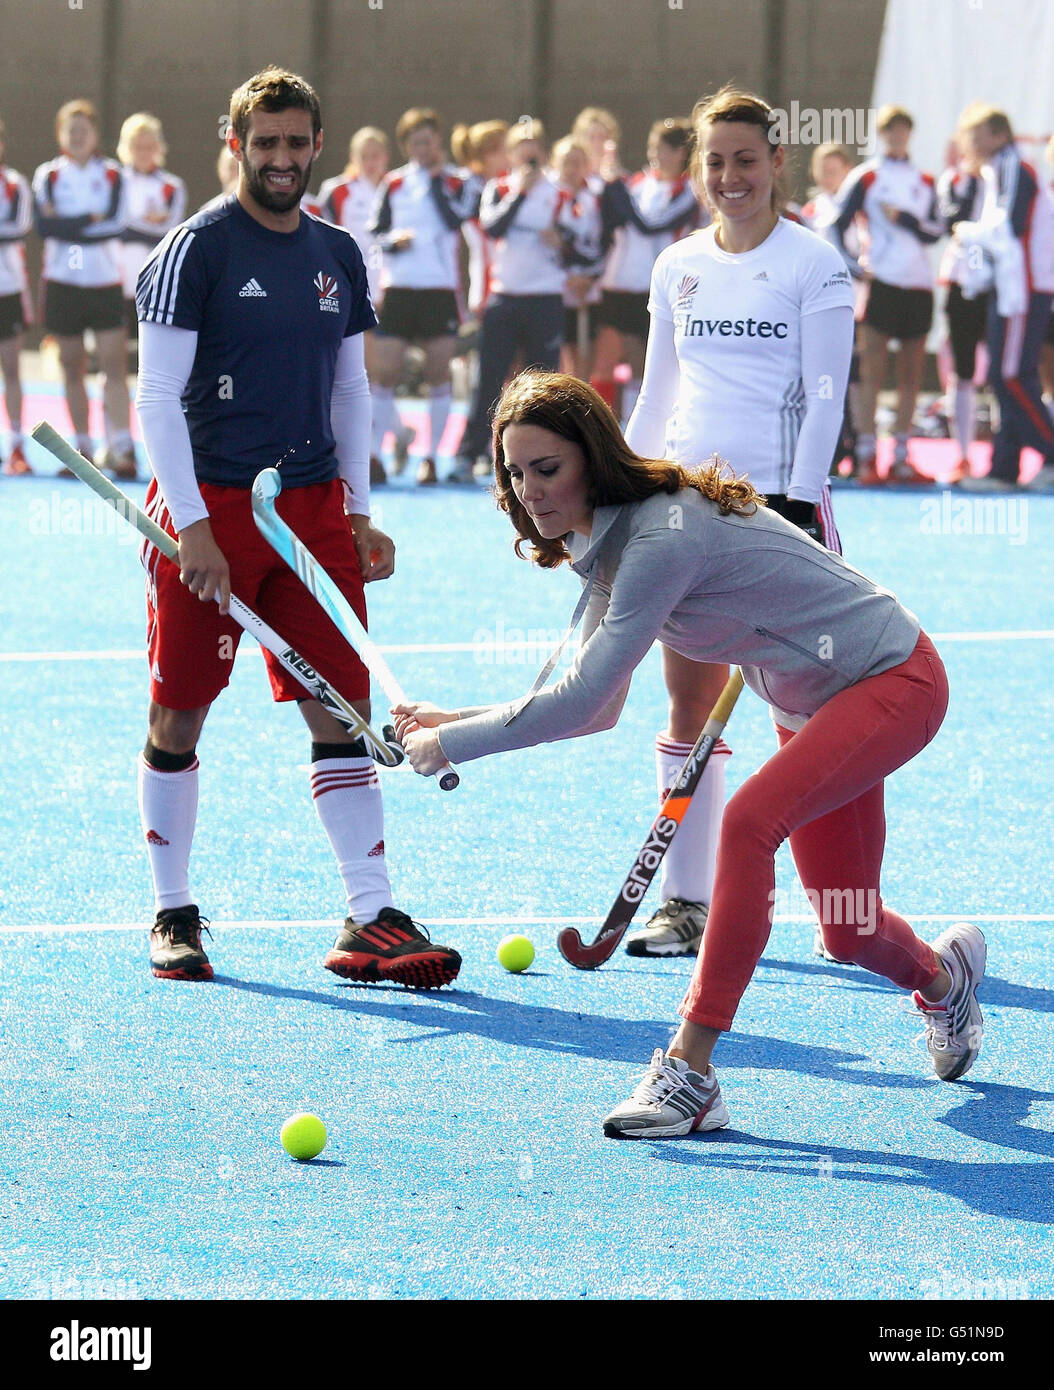 The Duchess of Cambridge plays hockey with the GB hockey teams at the Riverside Arena in the Olympic Park. Stock Photo